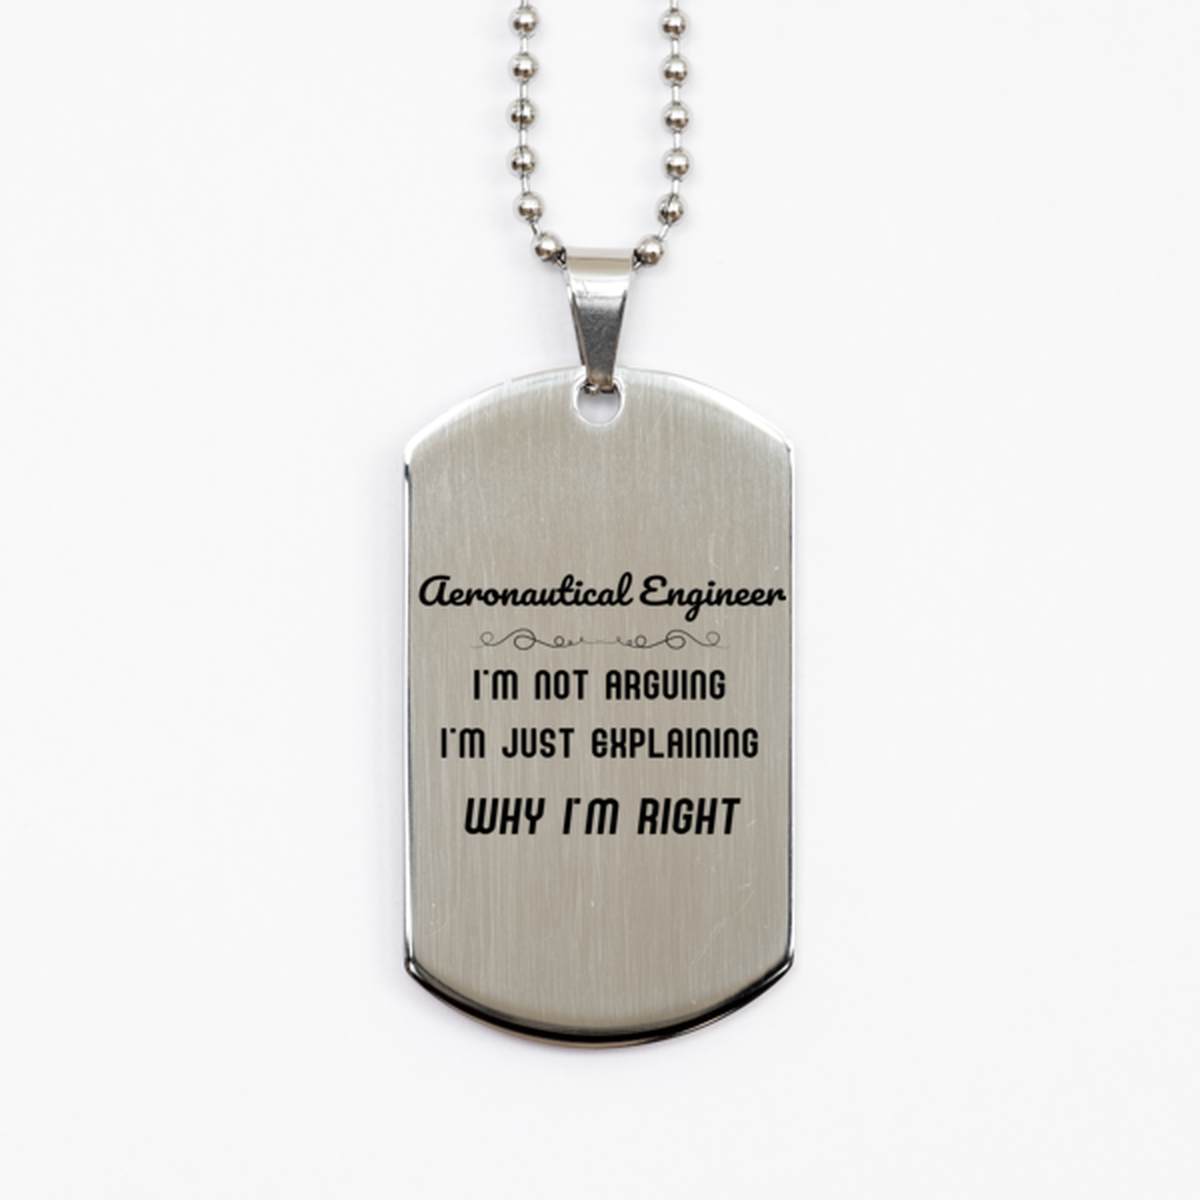 Aeronautical Engineer I'm not Arguing. I'm Just Explaining Why I'm RIGHT Silver Dog Tag, Funny Saying Quote Aeronautical Engineer Gifts For Aeronautical Engineer Graduation Birthday Christmas Gifts for Men Women Coworker